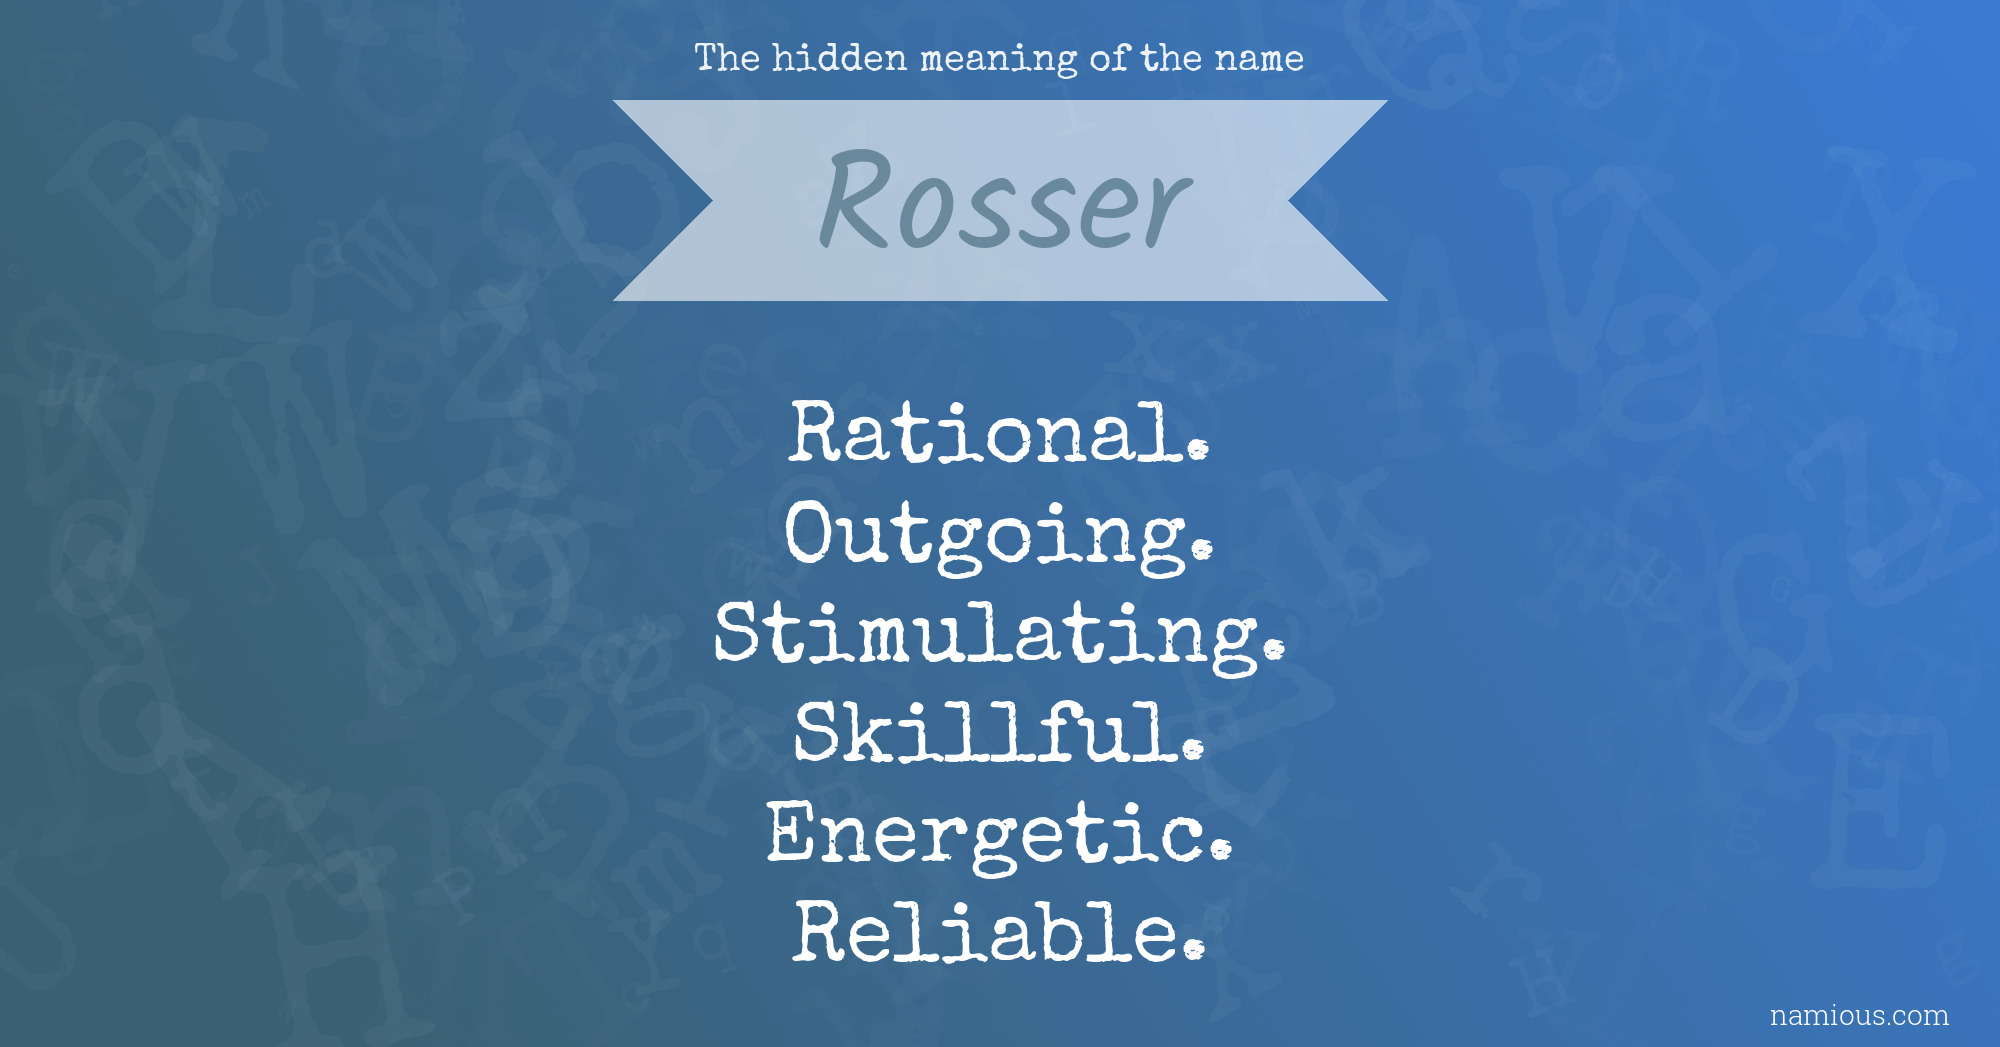 The hidden meaning of the name Rosser